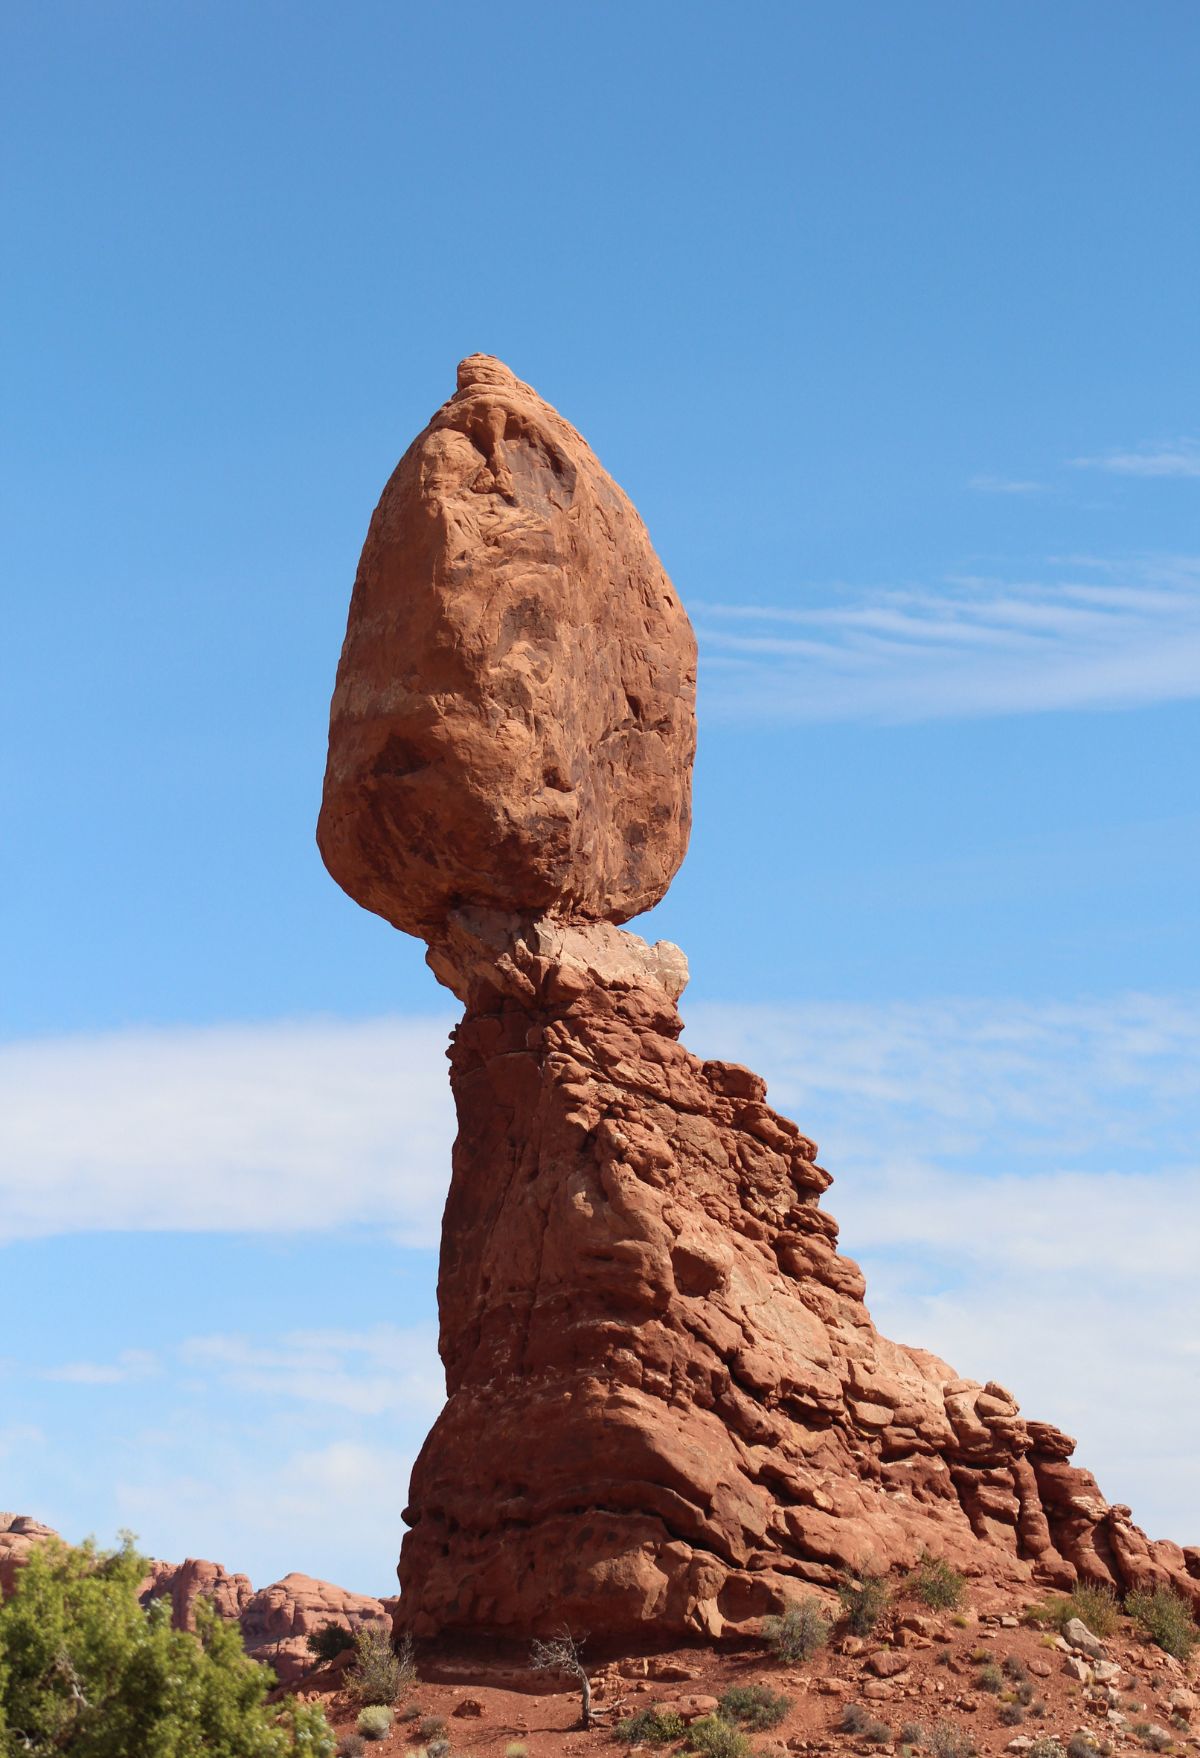 A rock formation in the desert. BALANCING ROCK ARCHES NP